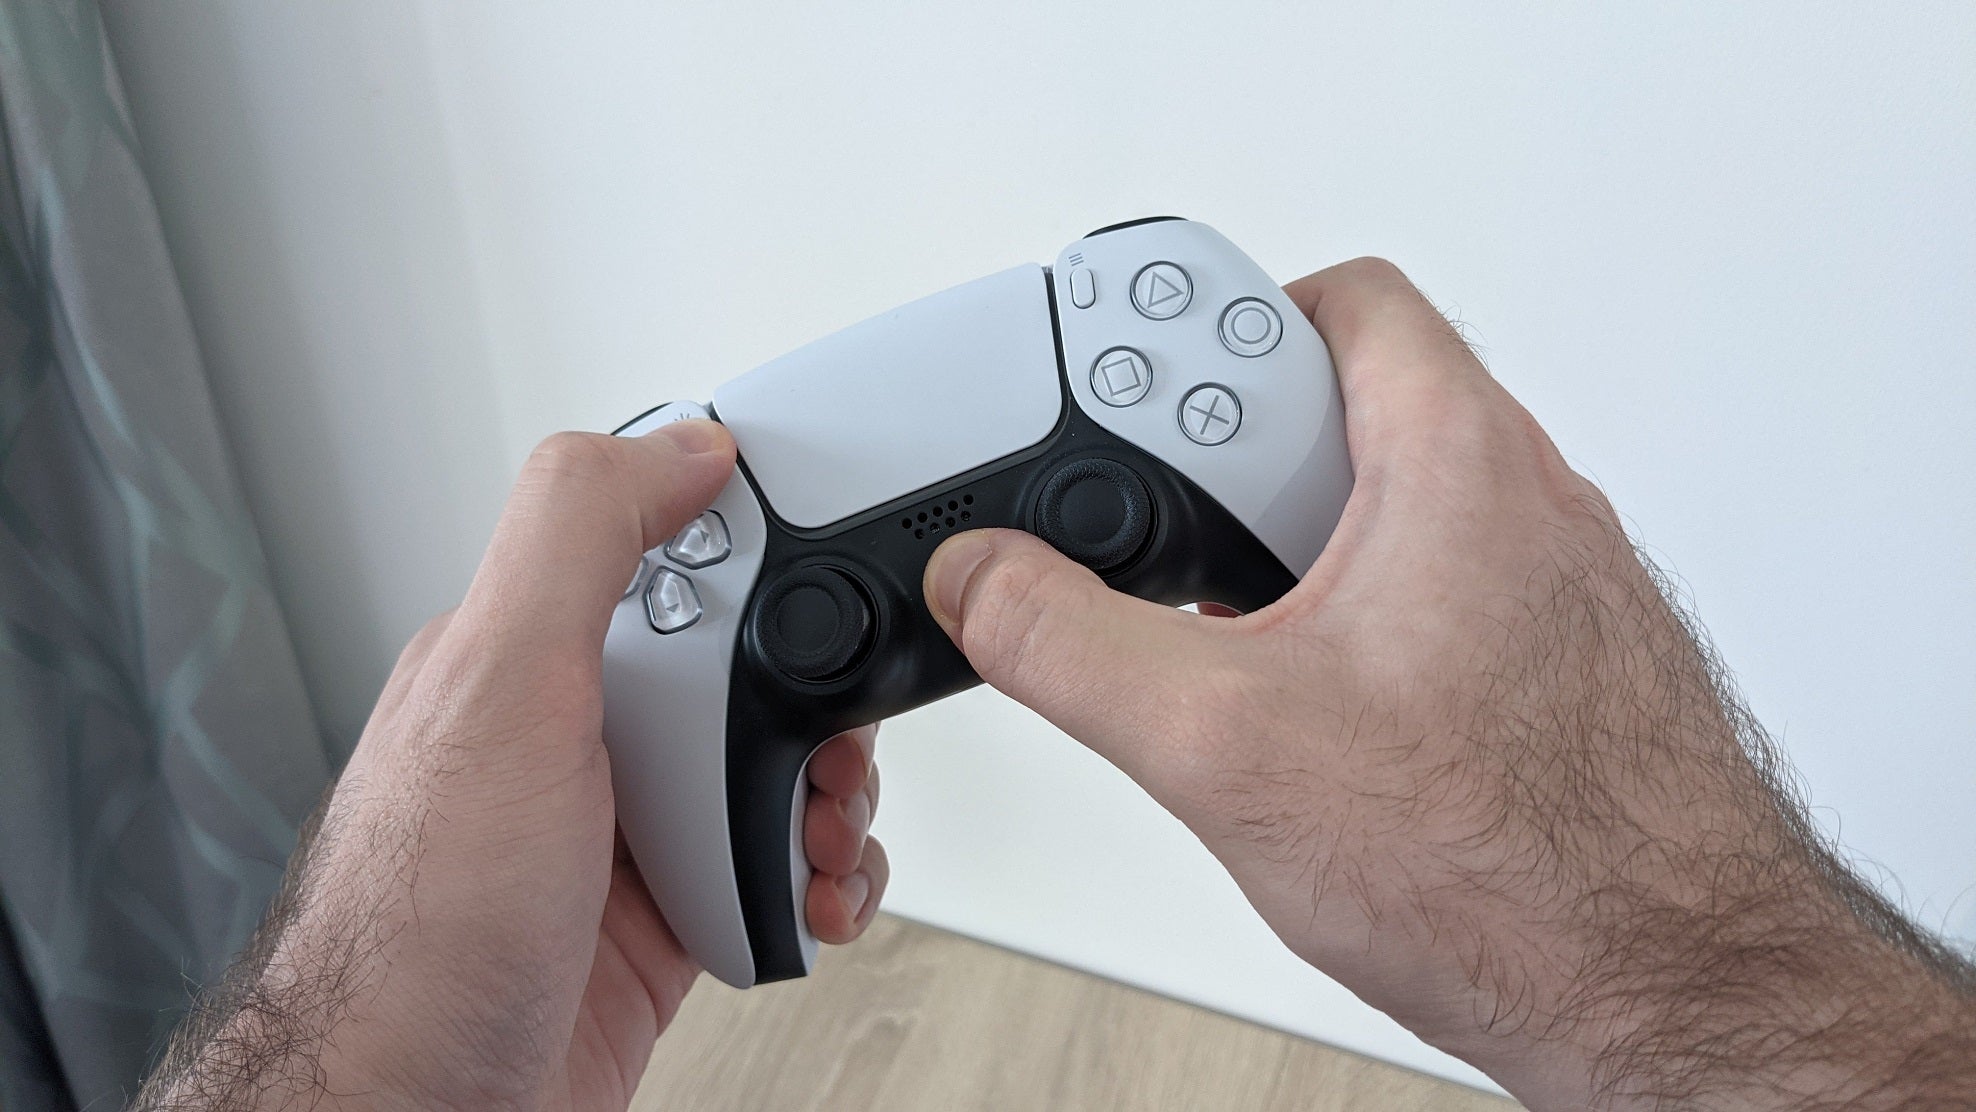 A PS5 controller, with the user's hands holding down the PS and Share buttons to initiate Bluetooth pairing.